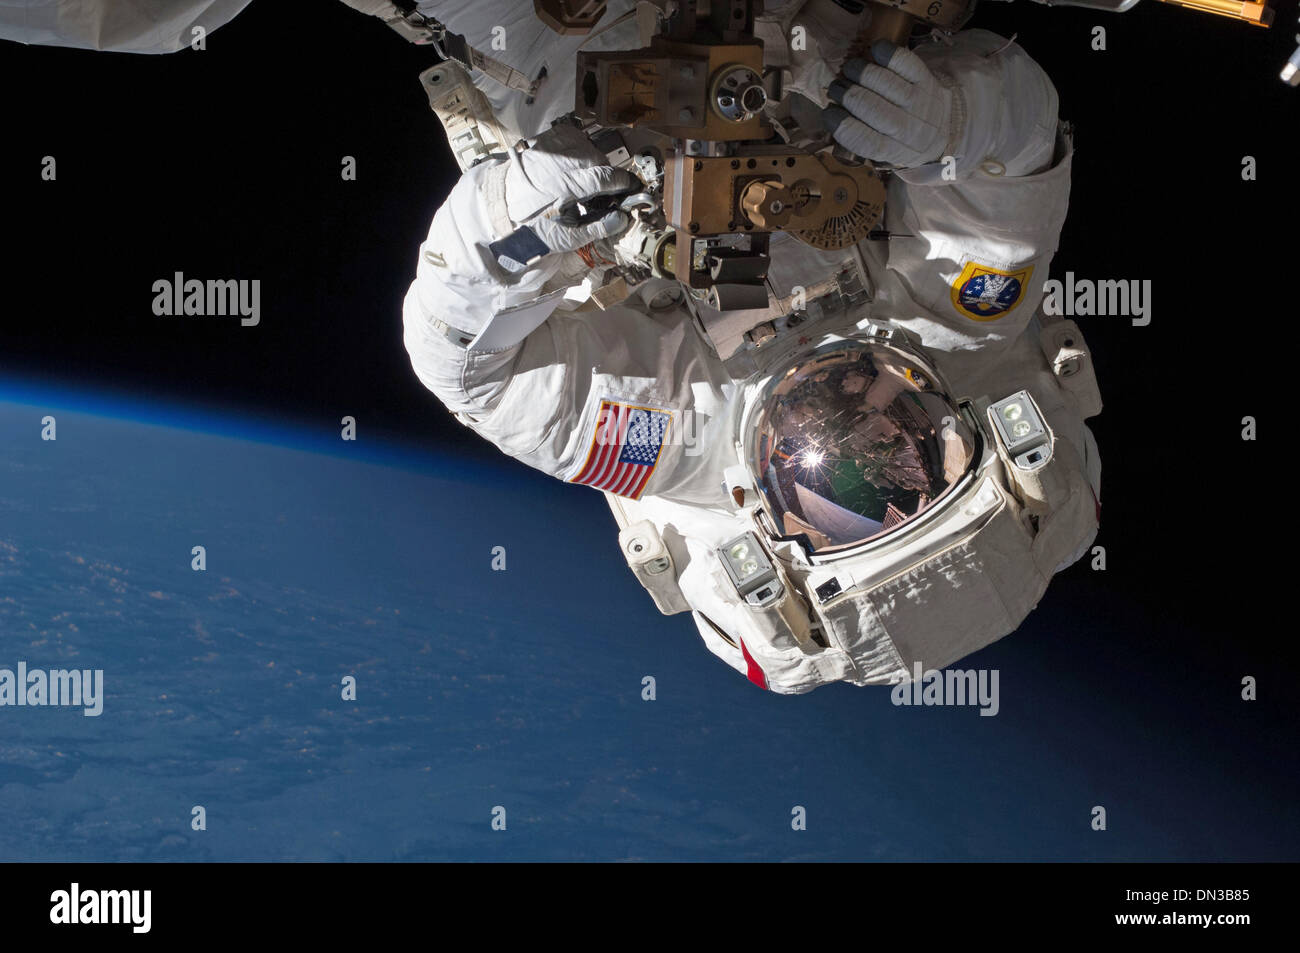 NASA Astronauts Expedition 35 Flight Engineers Chris Cassidy (pictured) spacewalk May 11, 2013 International Space Station Stock Photo